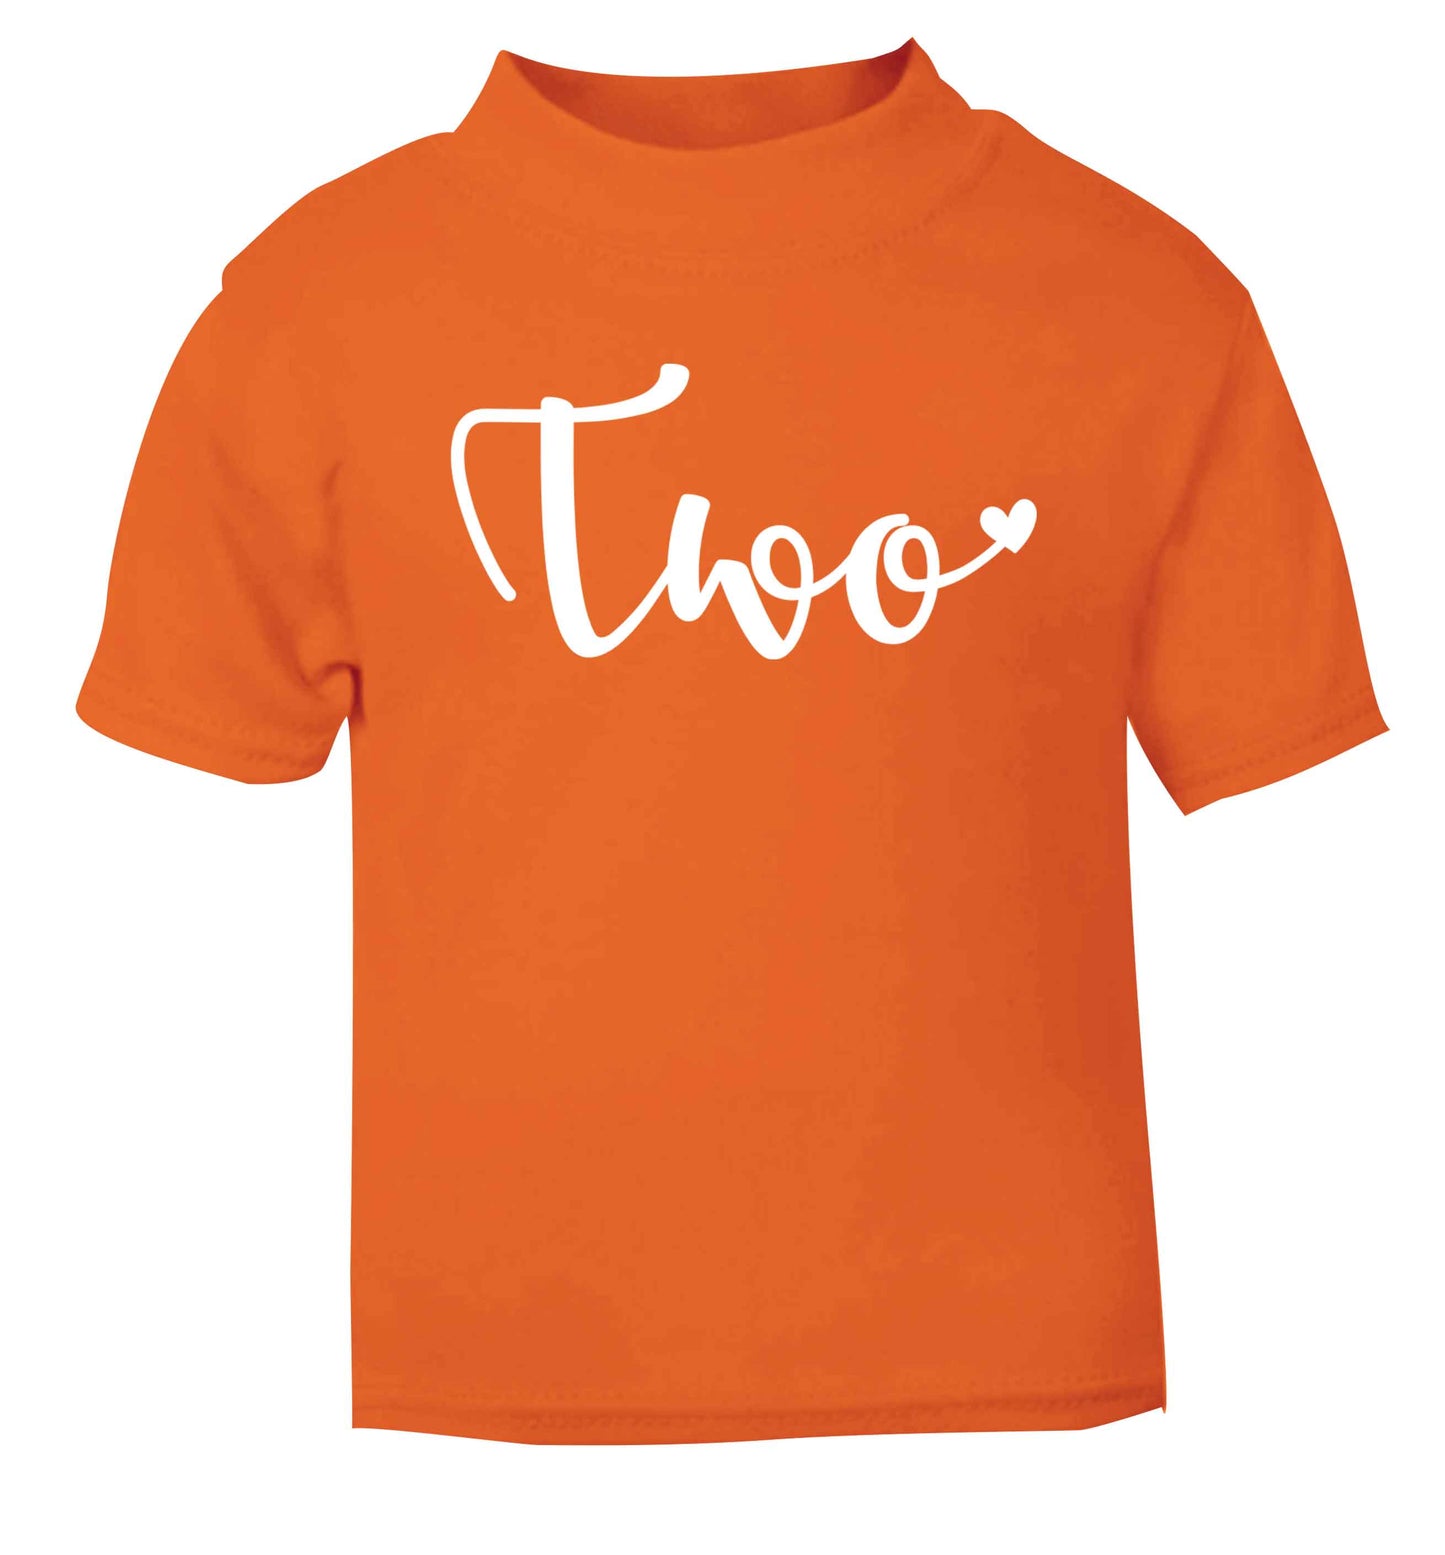 Two and Heart orange baby toddler Tshirt 2 Years